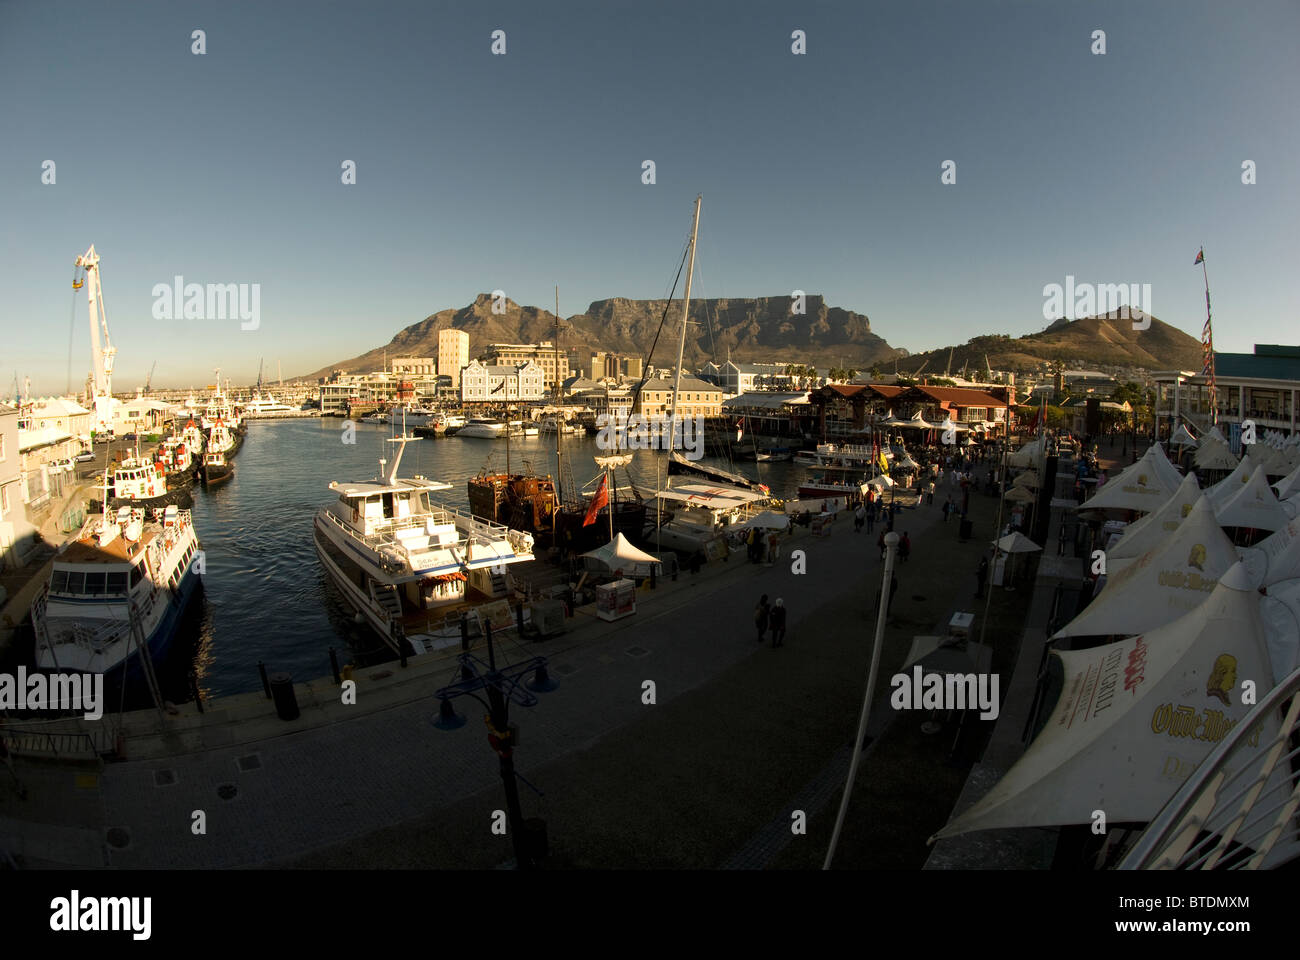 V & A Waterfront in Cape Town with the iconic Table Mountain in the background Stock Photo